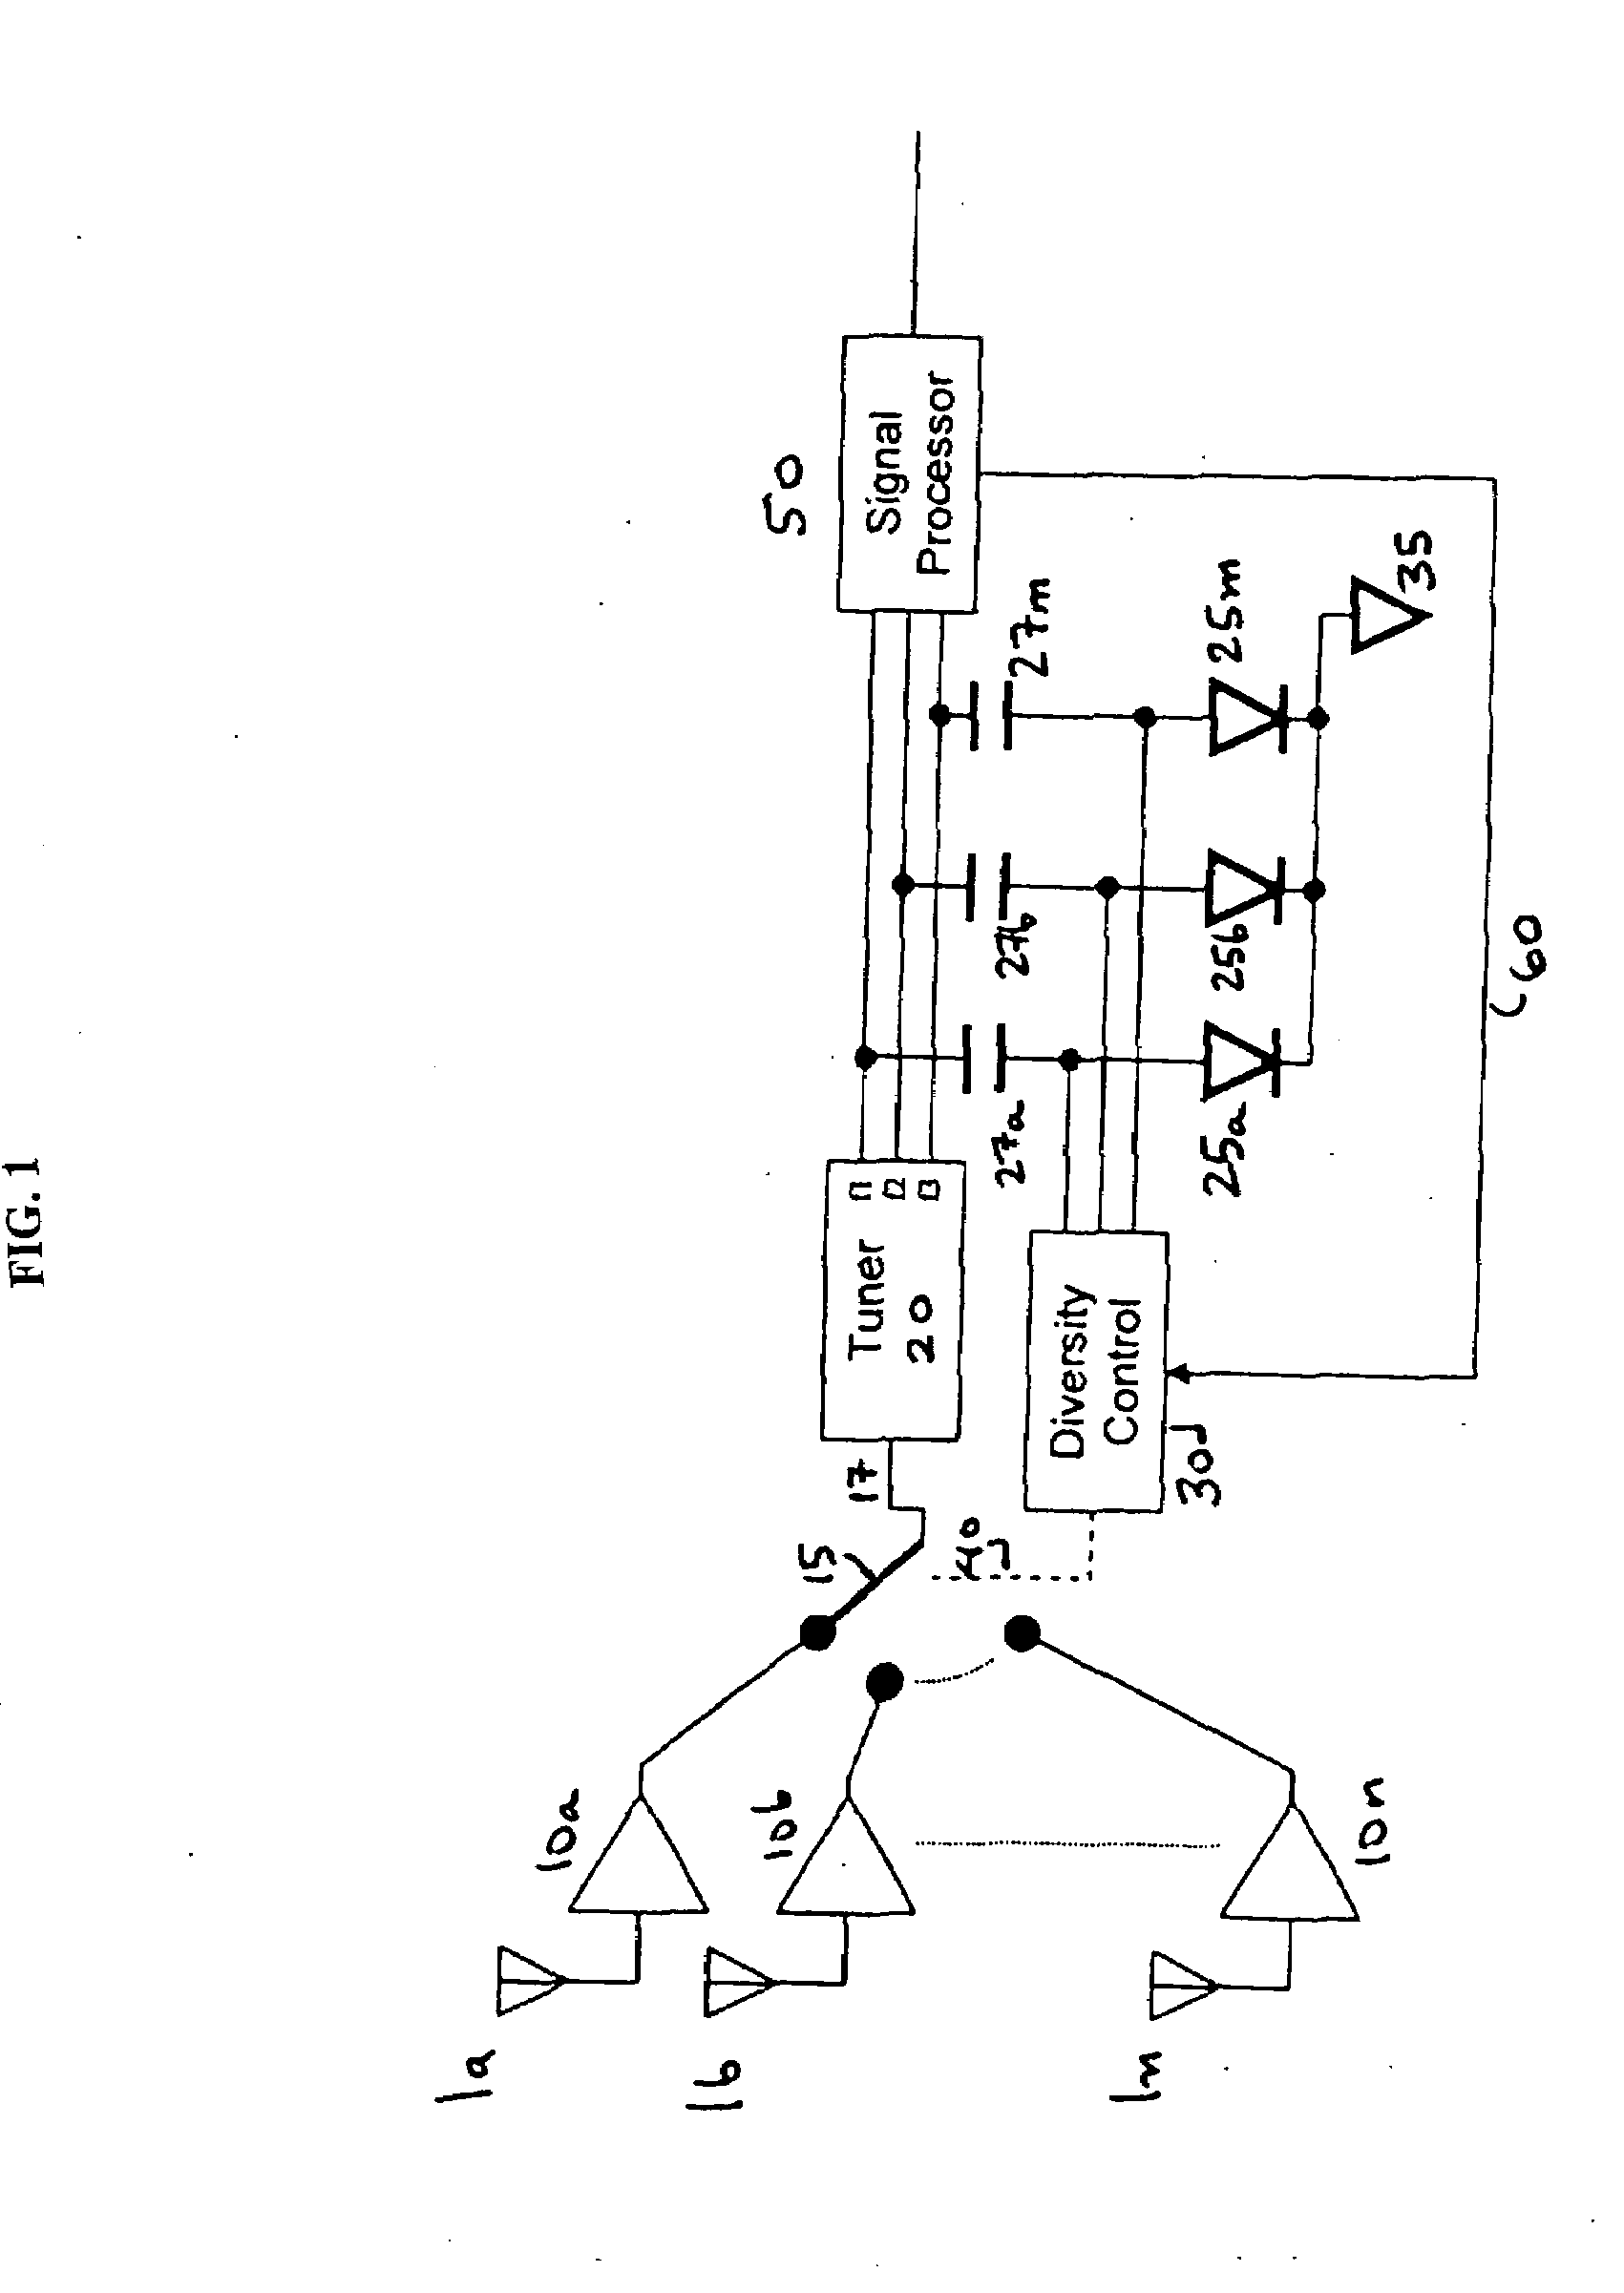 Interface between a switched diversity antenna system and digital radio receiver